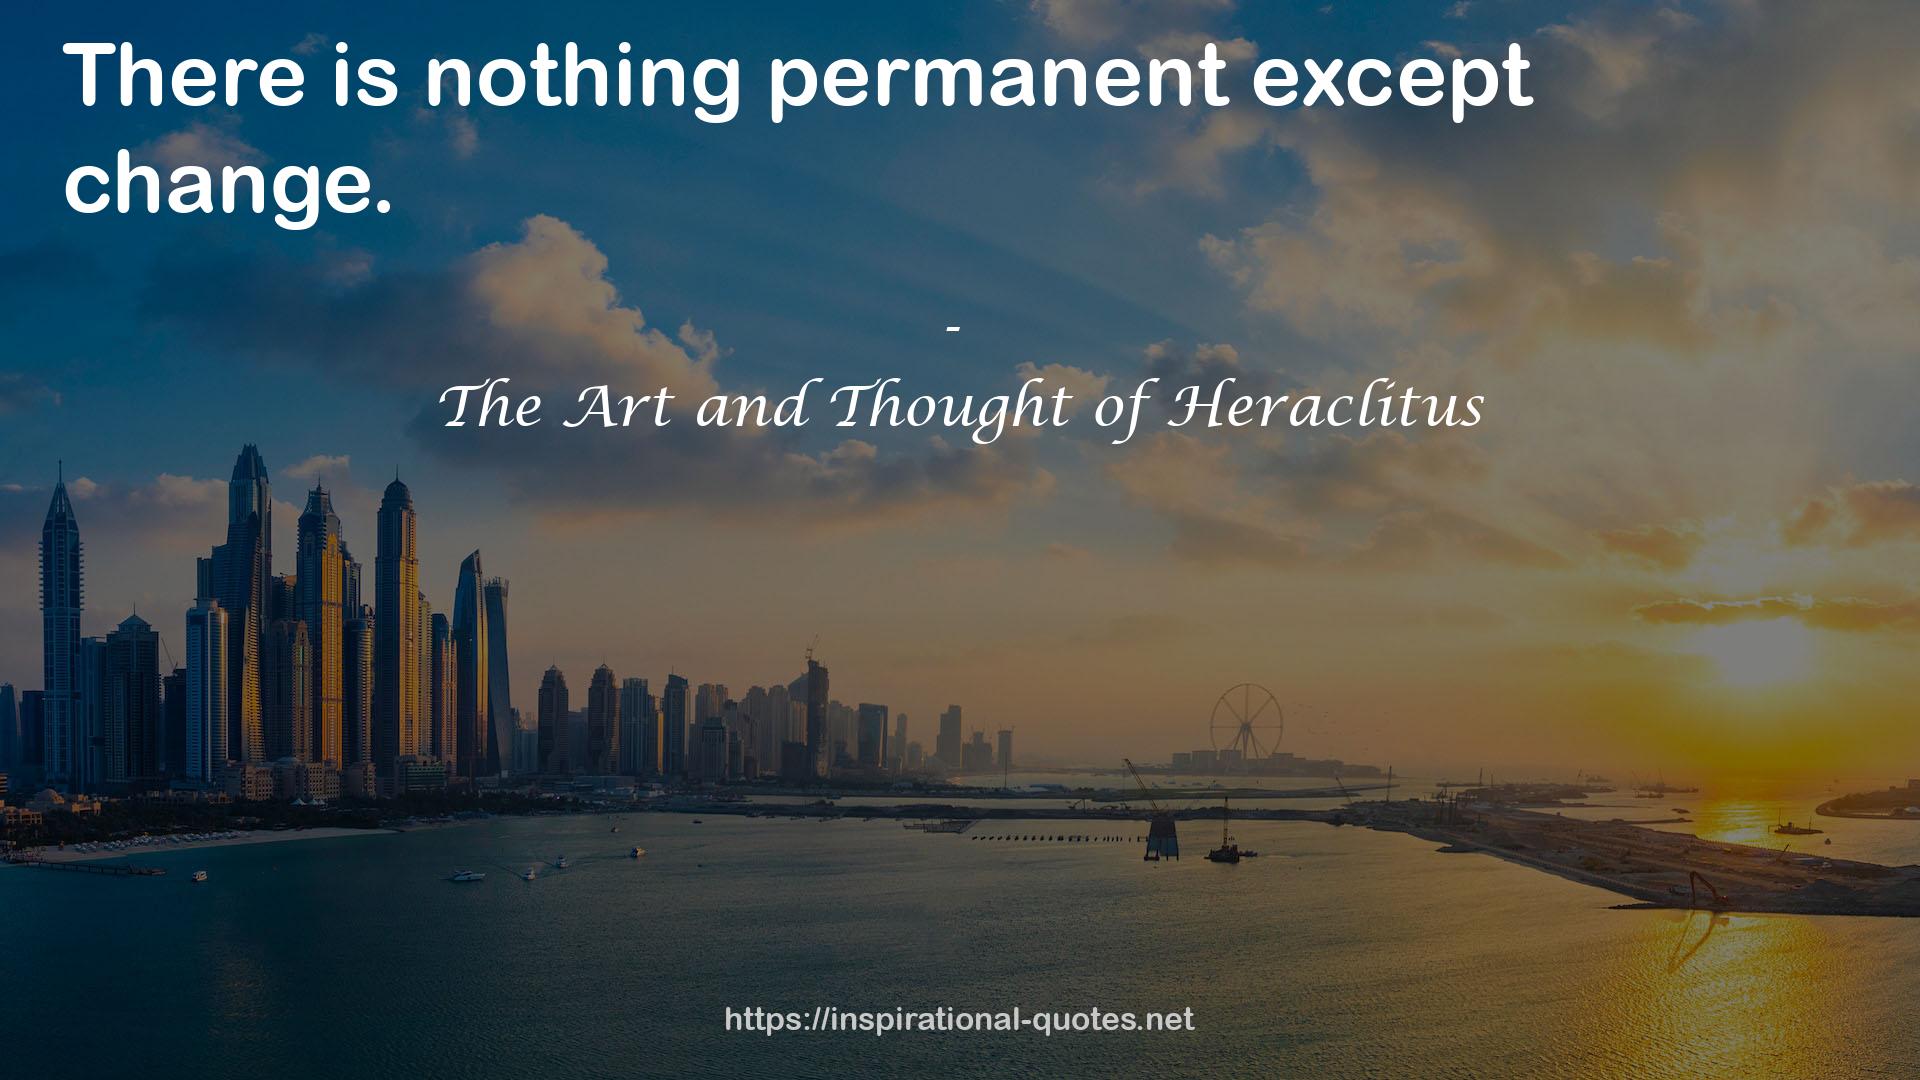 The Art and Thought of Heraclitus QUOTES